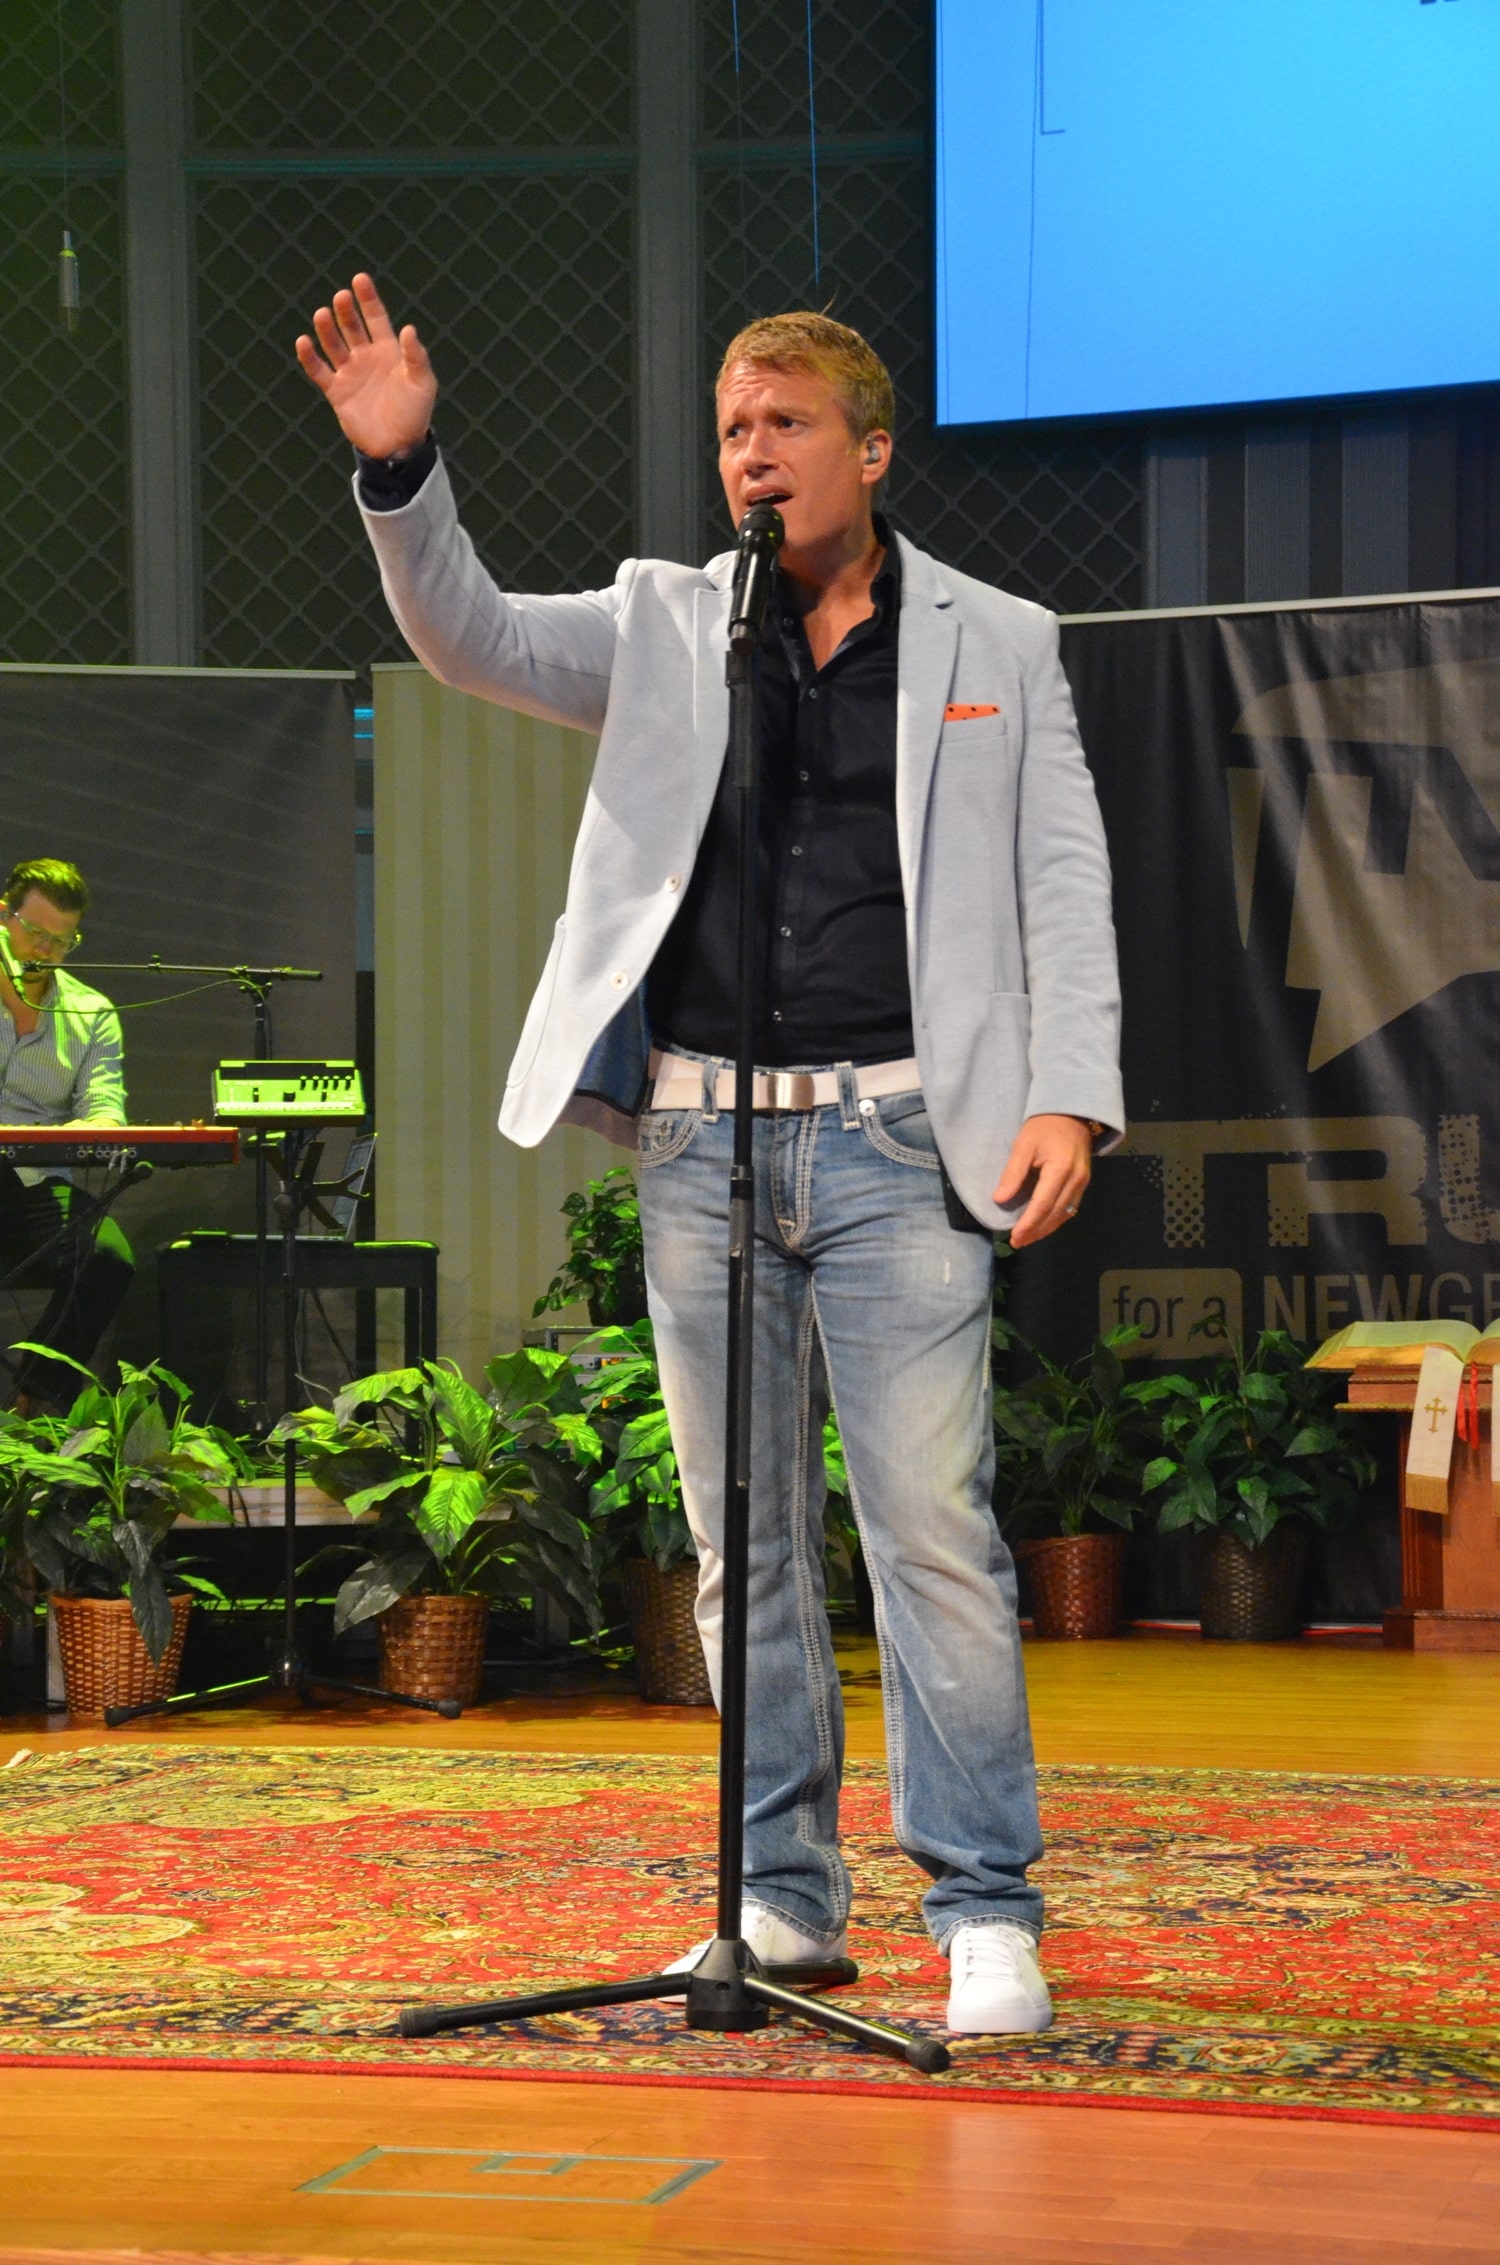  Charles Billingsley leads worship at the TNG conference September 5-6. 